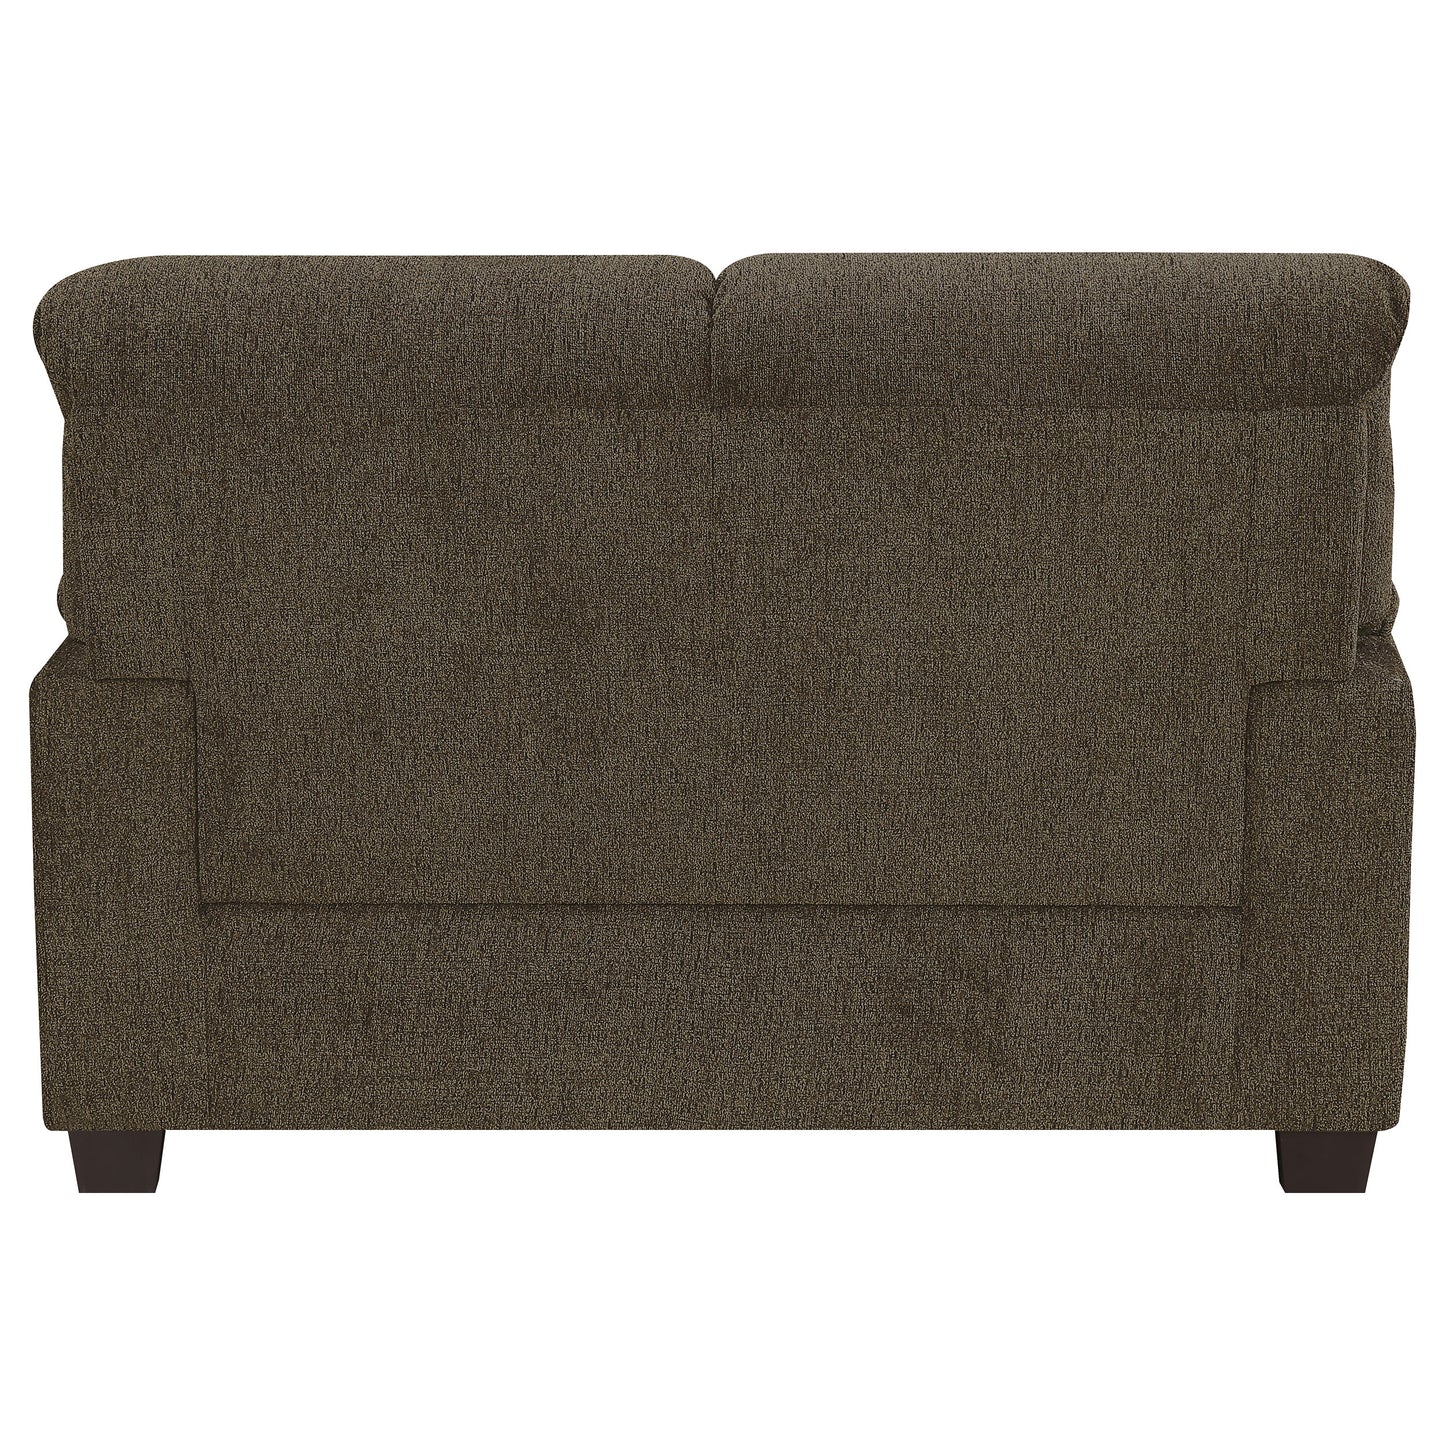 Clementine Upholstered Loveseat with Nailhead Trim Brown